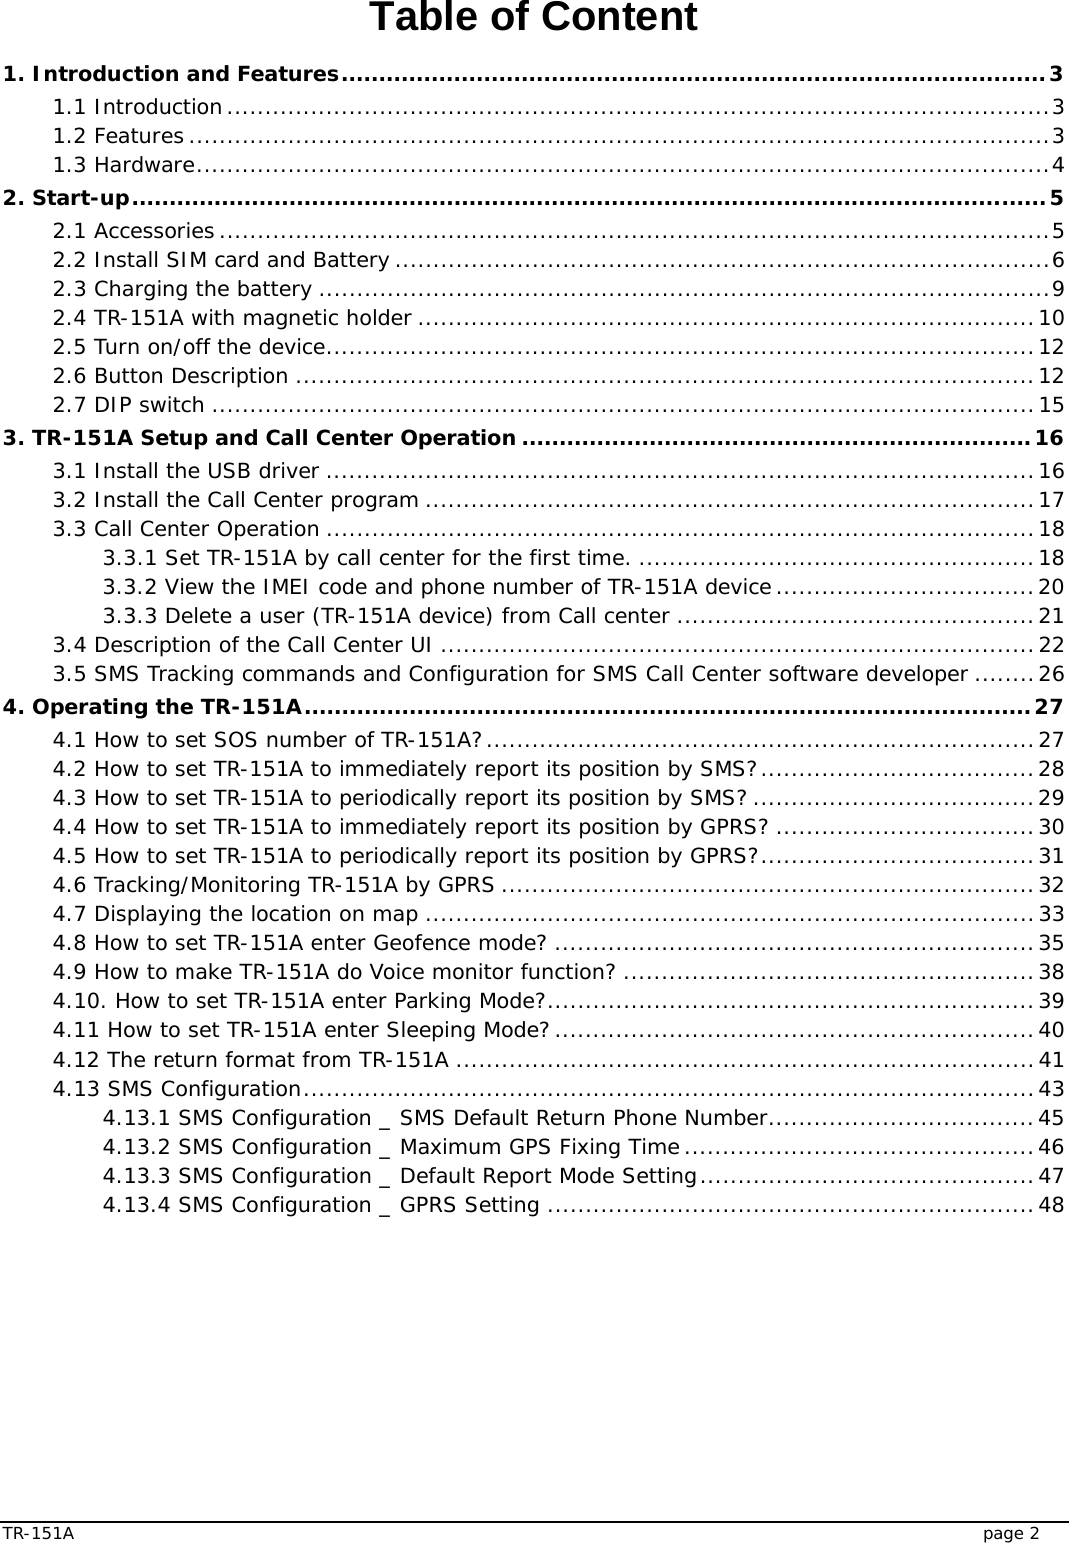  TR-151A   page 2 Table of Content 1. Introduction and Features..............................................................................................3 1.1 Introduction............................................................................................................3 1.2 Features .................................................................................................................3 1.3 Hardware................................................................................................................4 2. Start-up..........................................................................................................................5 2.1 Accessories .............................................................................................................5 2.2 Install SIM card and Battery ......................................................................................6 2.3 Charging the battery ................................................................................................9 2.4 TR-151A with magnetic holder .................................................................................10 2.5 Turn on/off the device.............................................................................................12 2.6 Button Description .................................................................................................12 2.7 DIP switch ............................................................................................................15 3. TR-151A Setup and Call Center Operation ....................................................................16 3.1 Install the USB driver .............................................................................................16 3.2 Install the Call Center program ................................................................................17 3.3 Call Center Operation .............................................................................................18 3.3.1 Set TR-151A by call center for the first time. ....................................................18 3.3.2 View the IMEI code and phone number of TR-151A device..................................20 3.3.3 Delete a user (TR-151A device) from Call center ...............................................21 3.4 Description of the Call Center UI ..............................................................................22 3.5 SMS Tracking commands and Configuration for SMS Call Center software developer ........26 4. Operating the TR-151A.................................................................................................27 4.1 How to set SOS number of TR-151A?........................................................................27 4.2 How to set TR-151A to immediately report its position by SMS?....................................28 4.3 How to set TR-151A to periodically report its position by SMS? .....................................29 4.4 How to set TR-151A to immediately report its position by GPRS? ..................................30 4.5 How to set TR-151A to periodically report its position by GPRS?....................................31 4.6 Tracking/Monitoring TR-151A by GPRS ......................................................................32 4.7 Displaying the location on map ................................................................................33 4.8 How to set TR-151A enter Geofence mode? ...............................................................35 4.9 How to make TR-151A do Voice monitor function? ......................................................38 4.10. How to set TR-151A enter Parking Mode?................................................................39 4.11 How to set TR-151A enter Sleeping Mode?...............................................................40 4.12 The return format from TR-151A ............................................................................41 4.13 SMS Configuration................................................................................................43 4.13.1 SMS Configuration _ SMS Default Return Phone Number...................................45 4.13.2 SMS Configuration _ Maximum GPS Fixing Time..............................................46 4.13.3 SMS Configuration _ Default Report Mode Setting............................................47 4.13.4 SMS Configuration _ GPRS Setting ................................................................48  